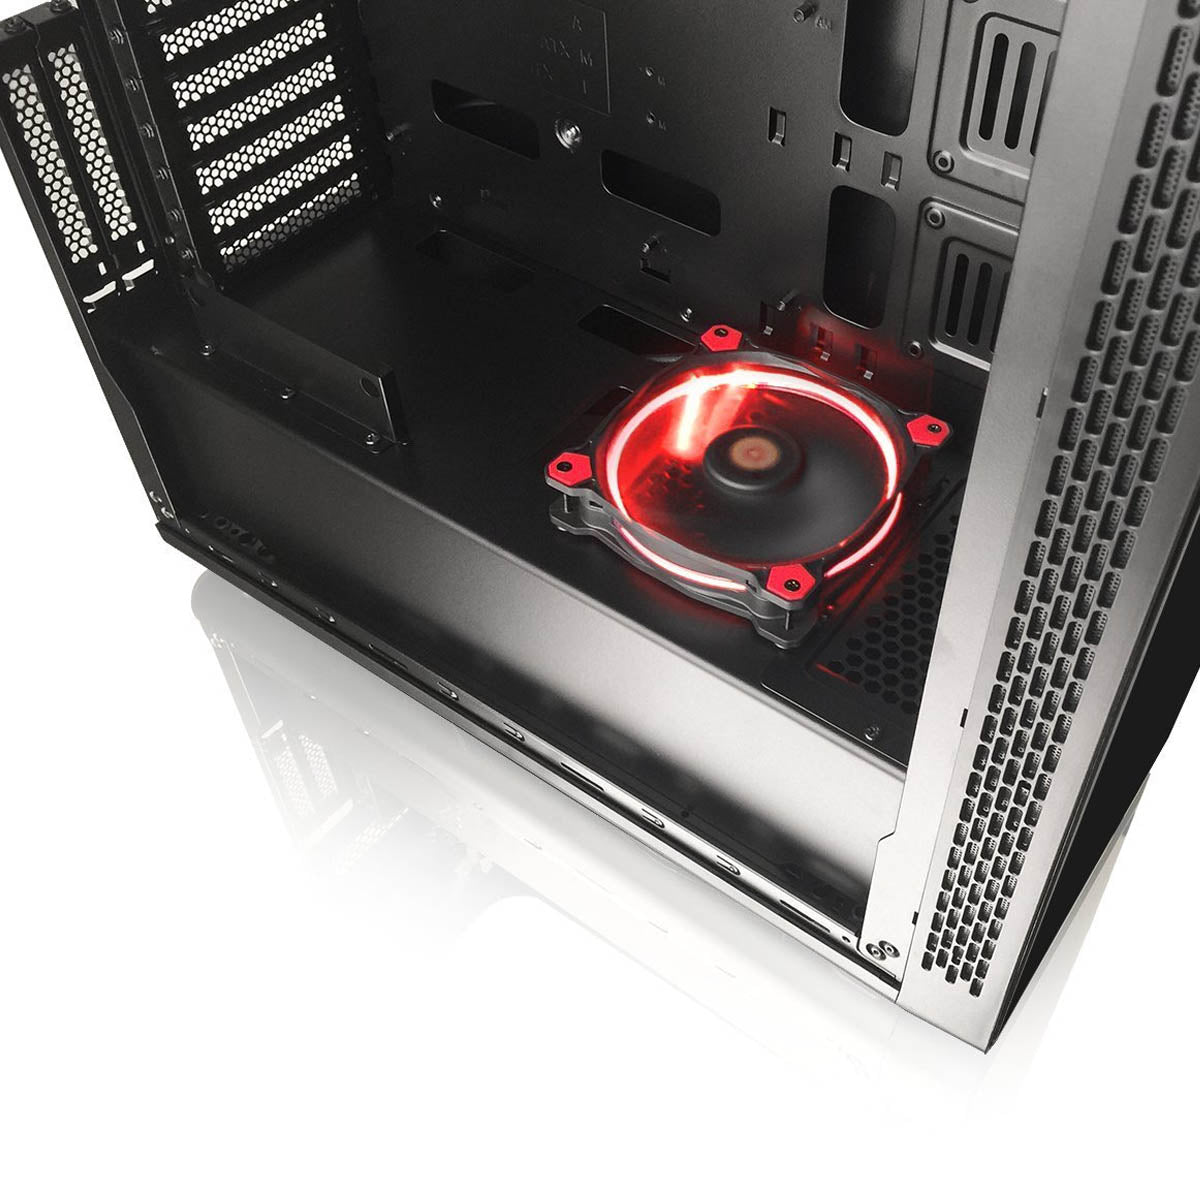 Thermaltake View 27 ATX Mid Tower Cabinet with Gull-Wing Window and One Pre-Installed 120mm Fan